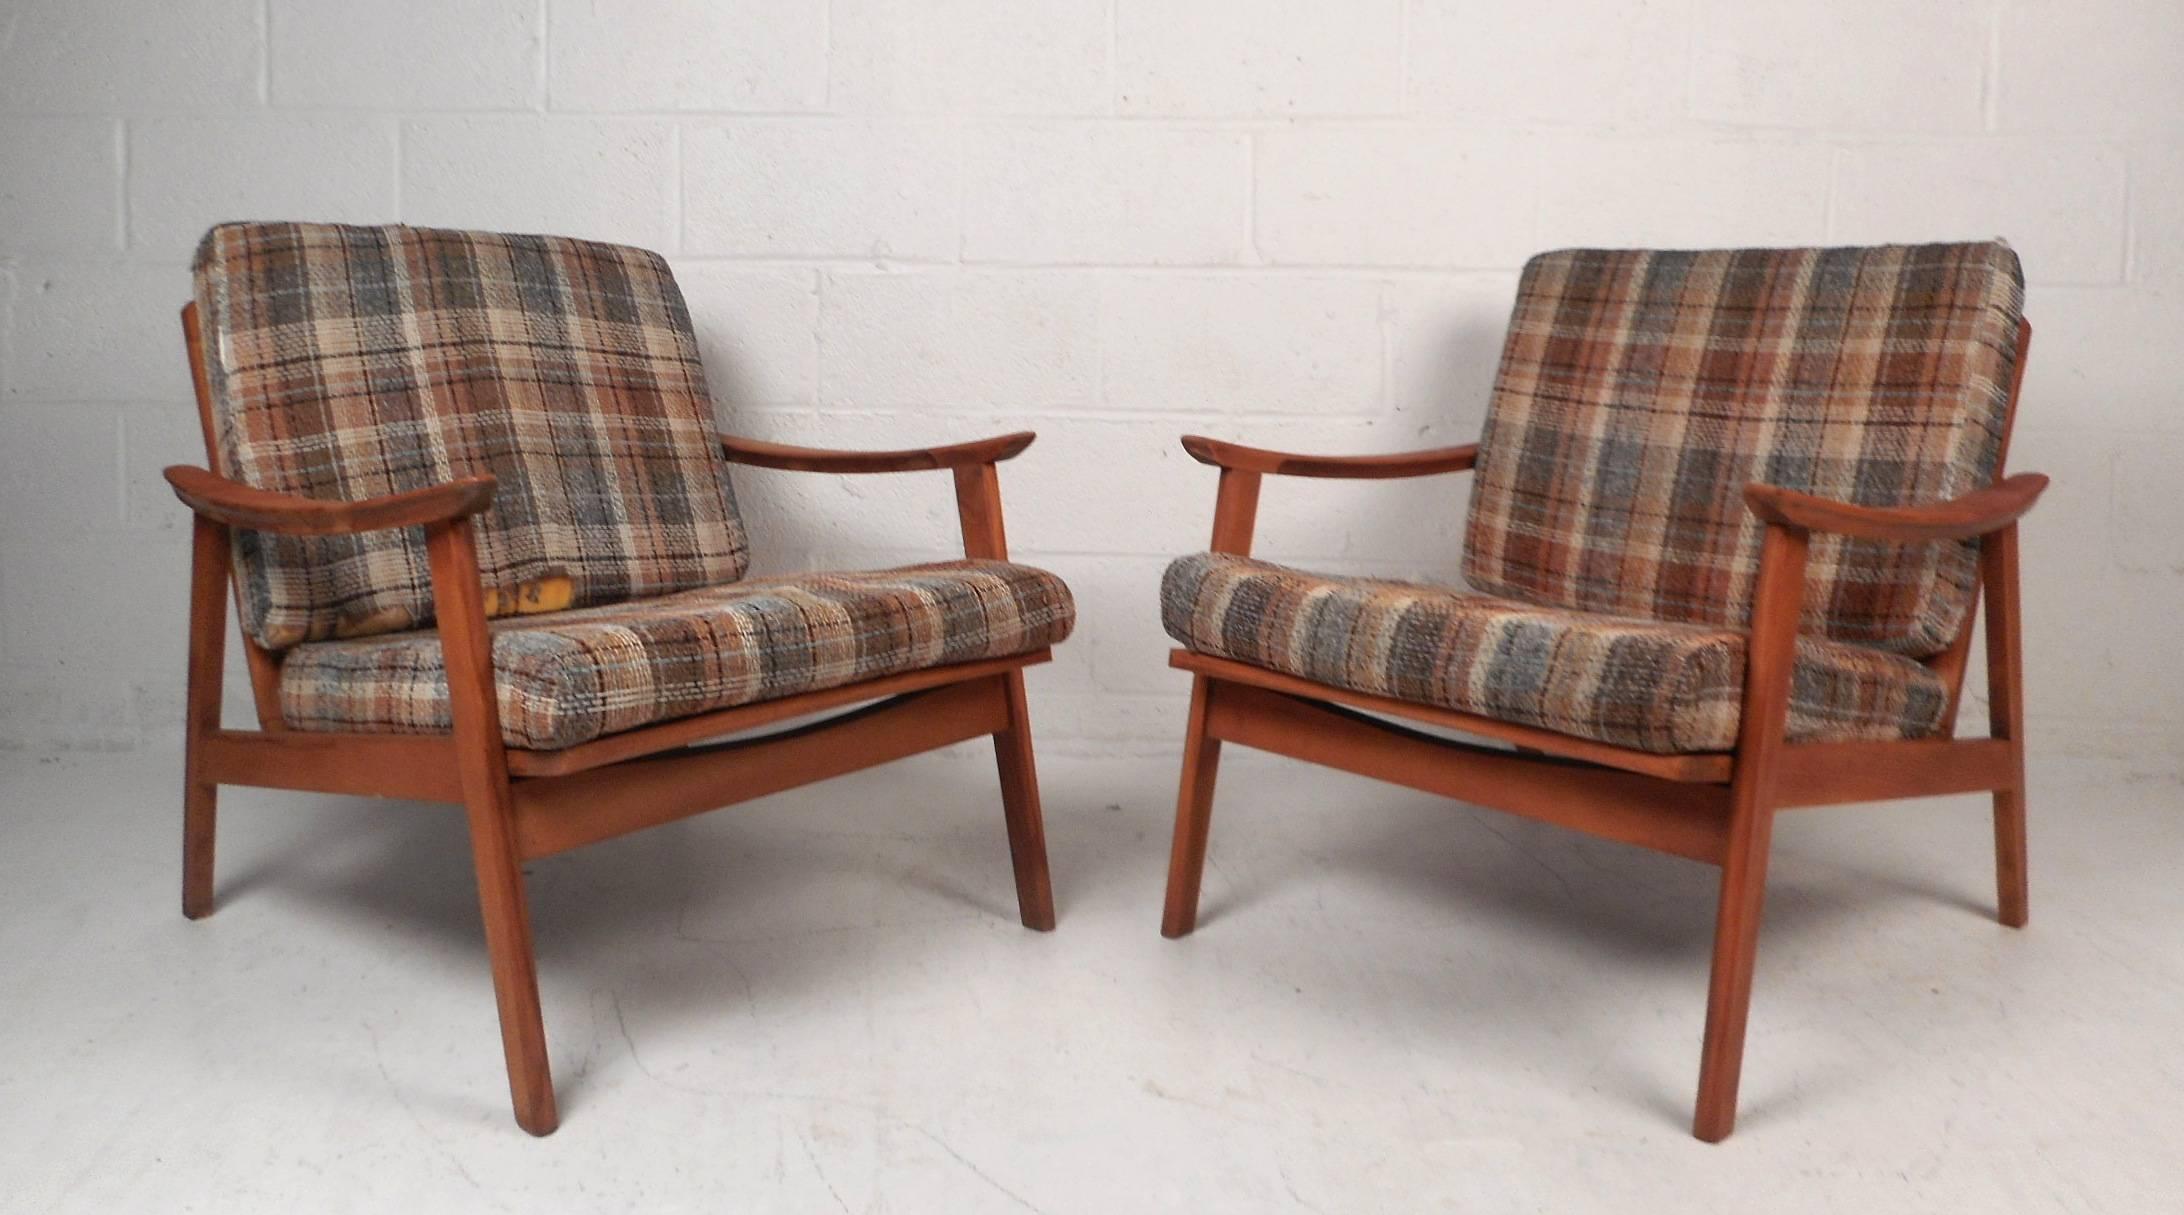 Stunning pair of vintage modern armchairs with sculpted arm rests, angled legs, and a spoked backrest. This extremely comfortable chair has overstuffed cushions upholstered in an elaborate plaid fabric. This Danish modern style pair is sure to add